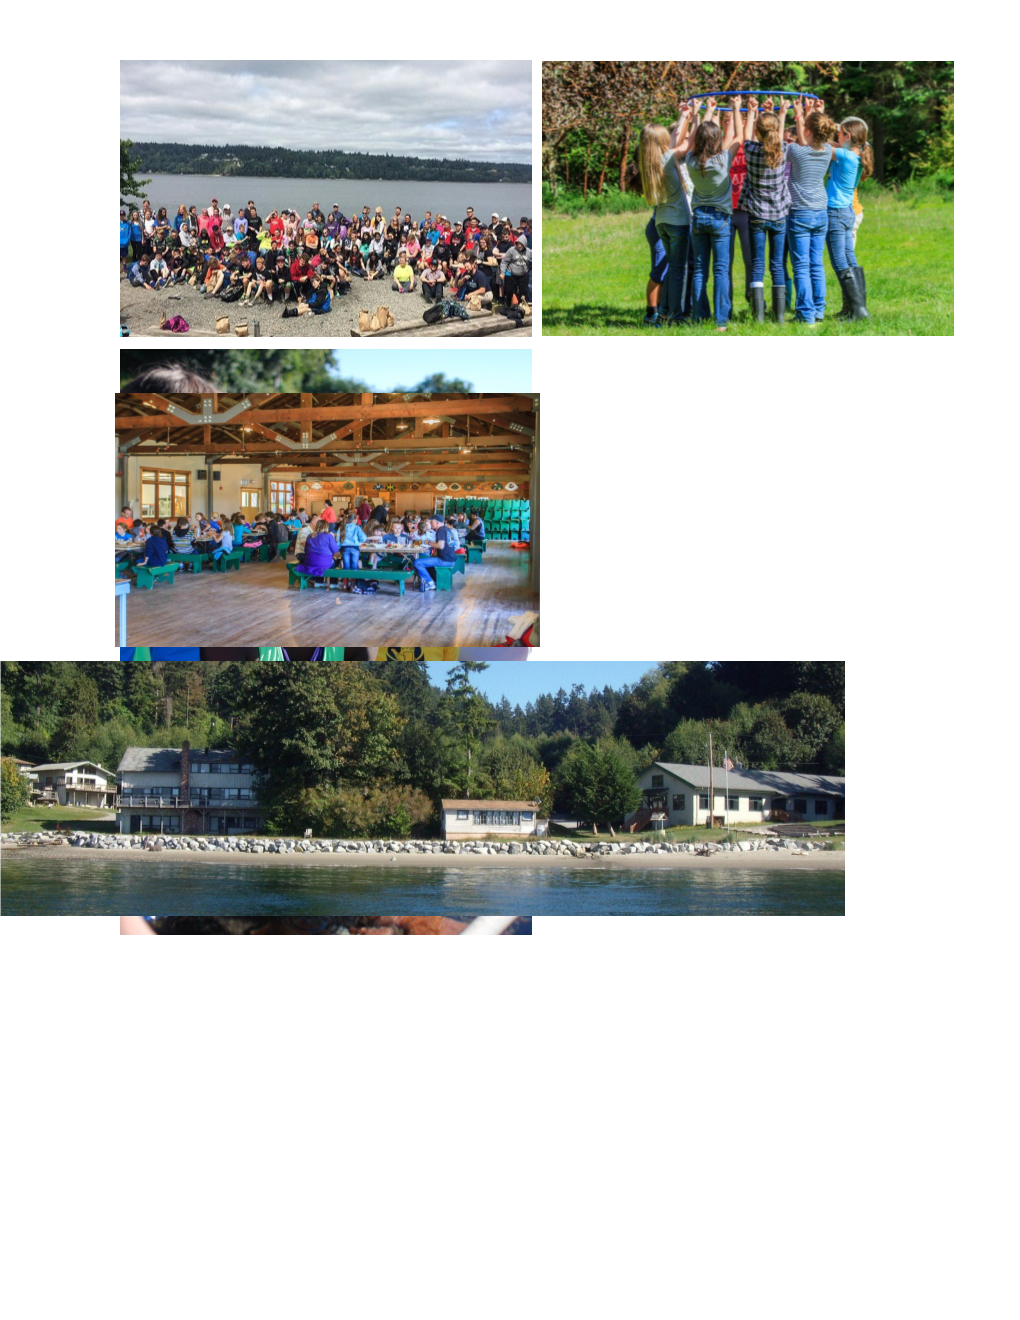 Welcome to the Camp Sealth Environmental Education Program!